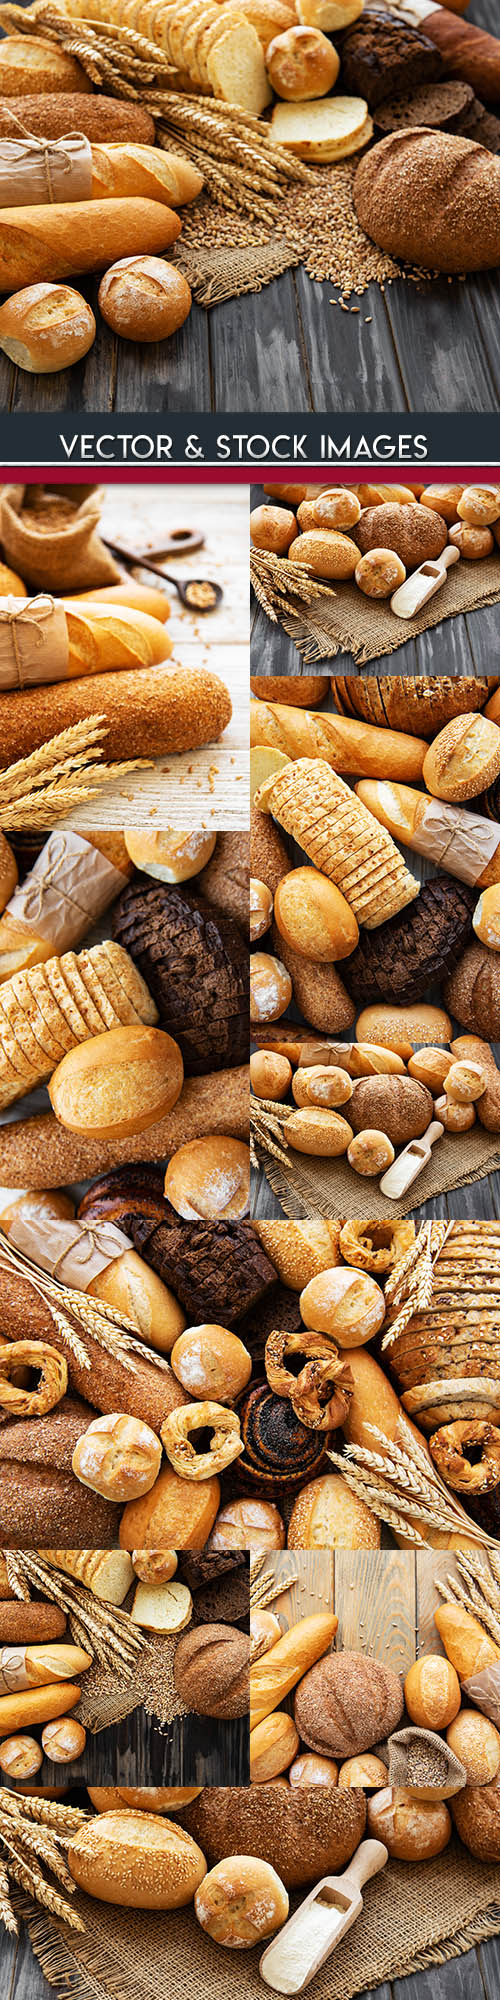 Bakery products and fresh bread from bakery